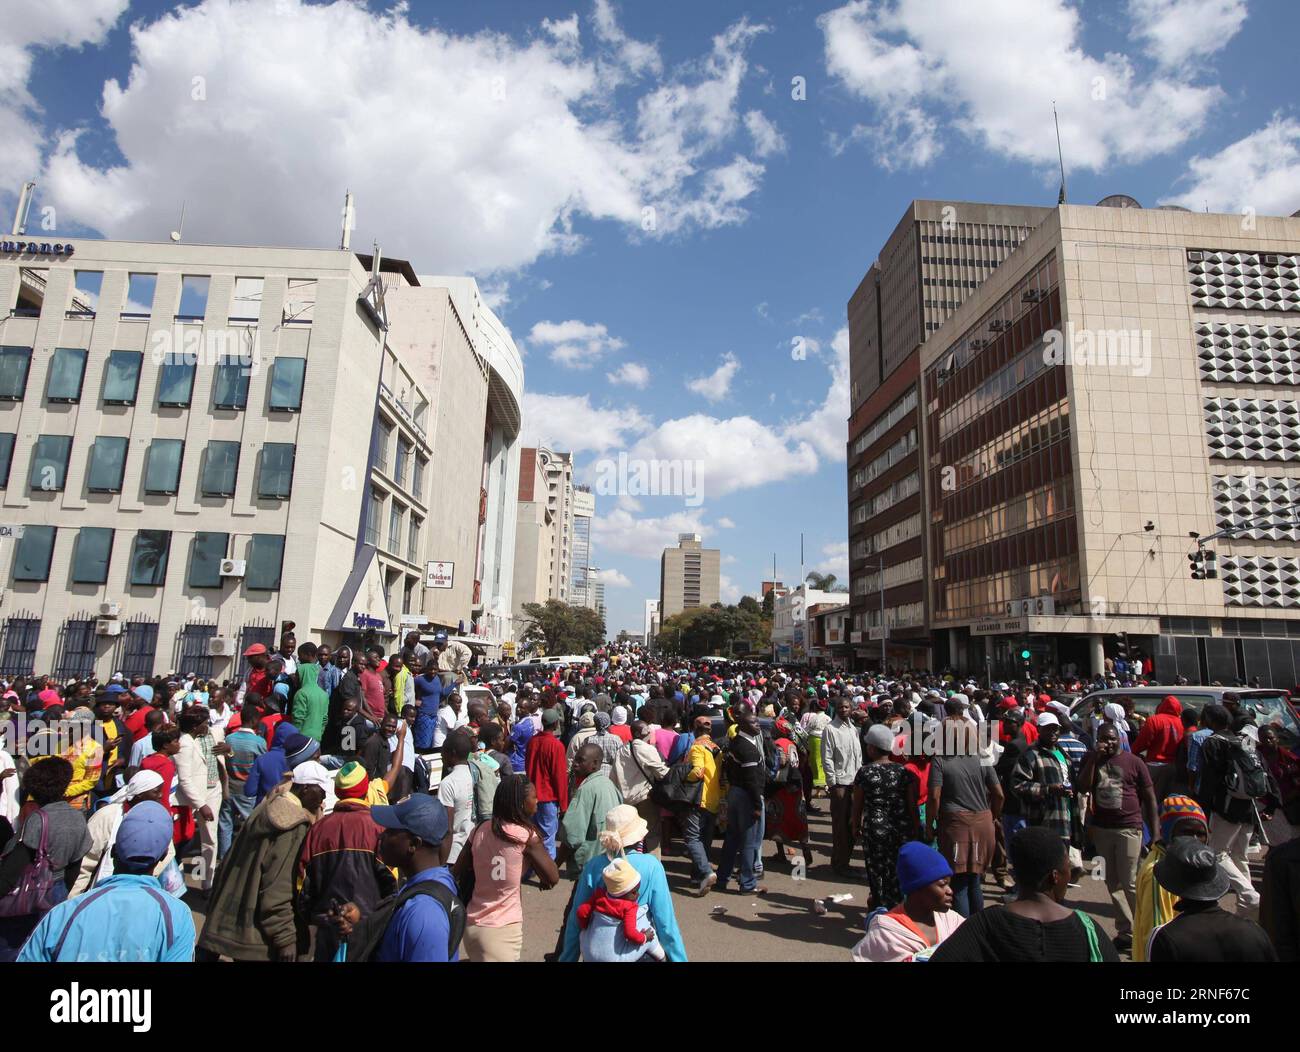 President Robert Mugabe s supporters march in the city center of Harare, capital of Zimbabwe, July 20, 2016. Thousands of President Robert Mugabe s supporters marched across the center of Zimbabwean capital Harare Wednesday. () (zy) ZIMBABWE-HARARE-MARCH Xinhua PUBLICATIONxNOTxINxCHN   President Robert Mugabe S Supporters March in The City Center of Harare Capital of Zimbabwe July 20 2016 thousands of President Robert Mugabe S Supporters marched across The Center of Zimbabwean Capital Harare Wednesday ZY Zimbabwe Harare March XINHUA PUBLICATIONxNOTxINxCHN Stock Photo